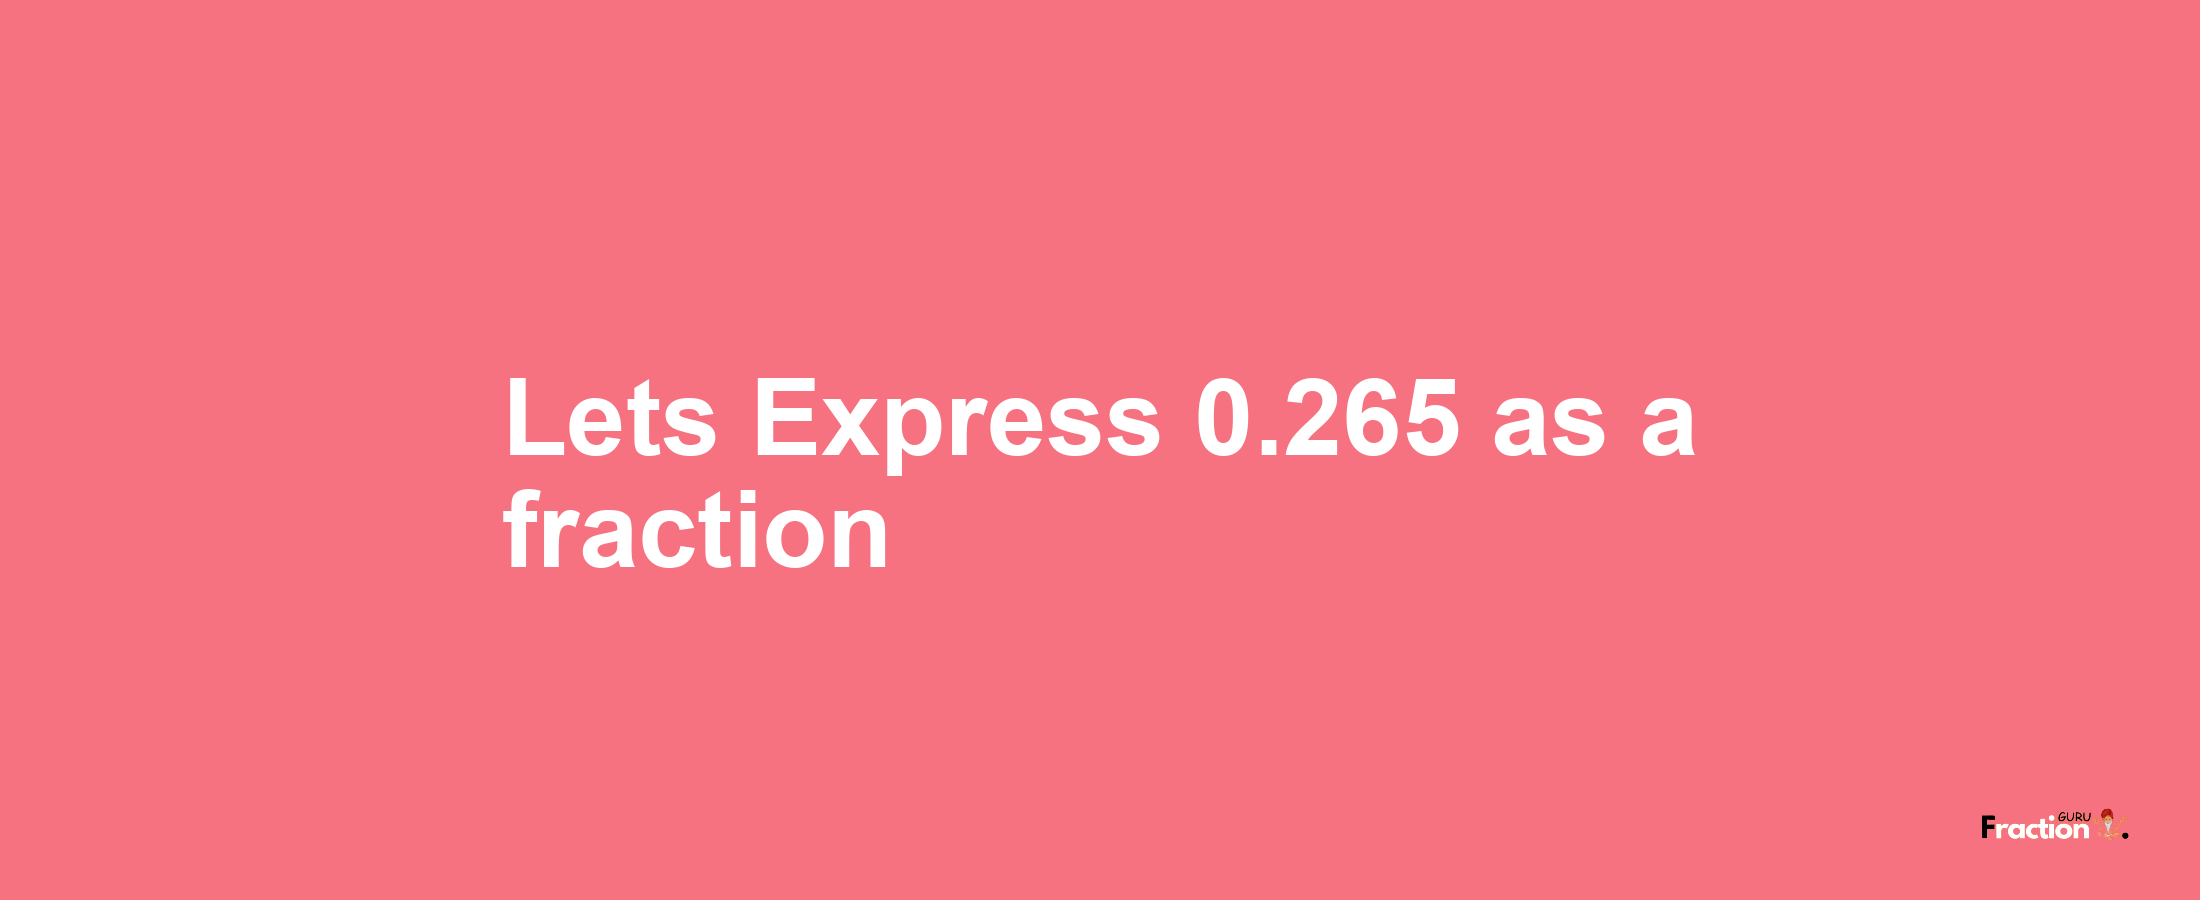 Lets Express 0.265 as afraction